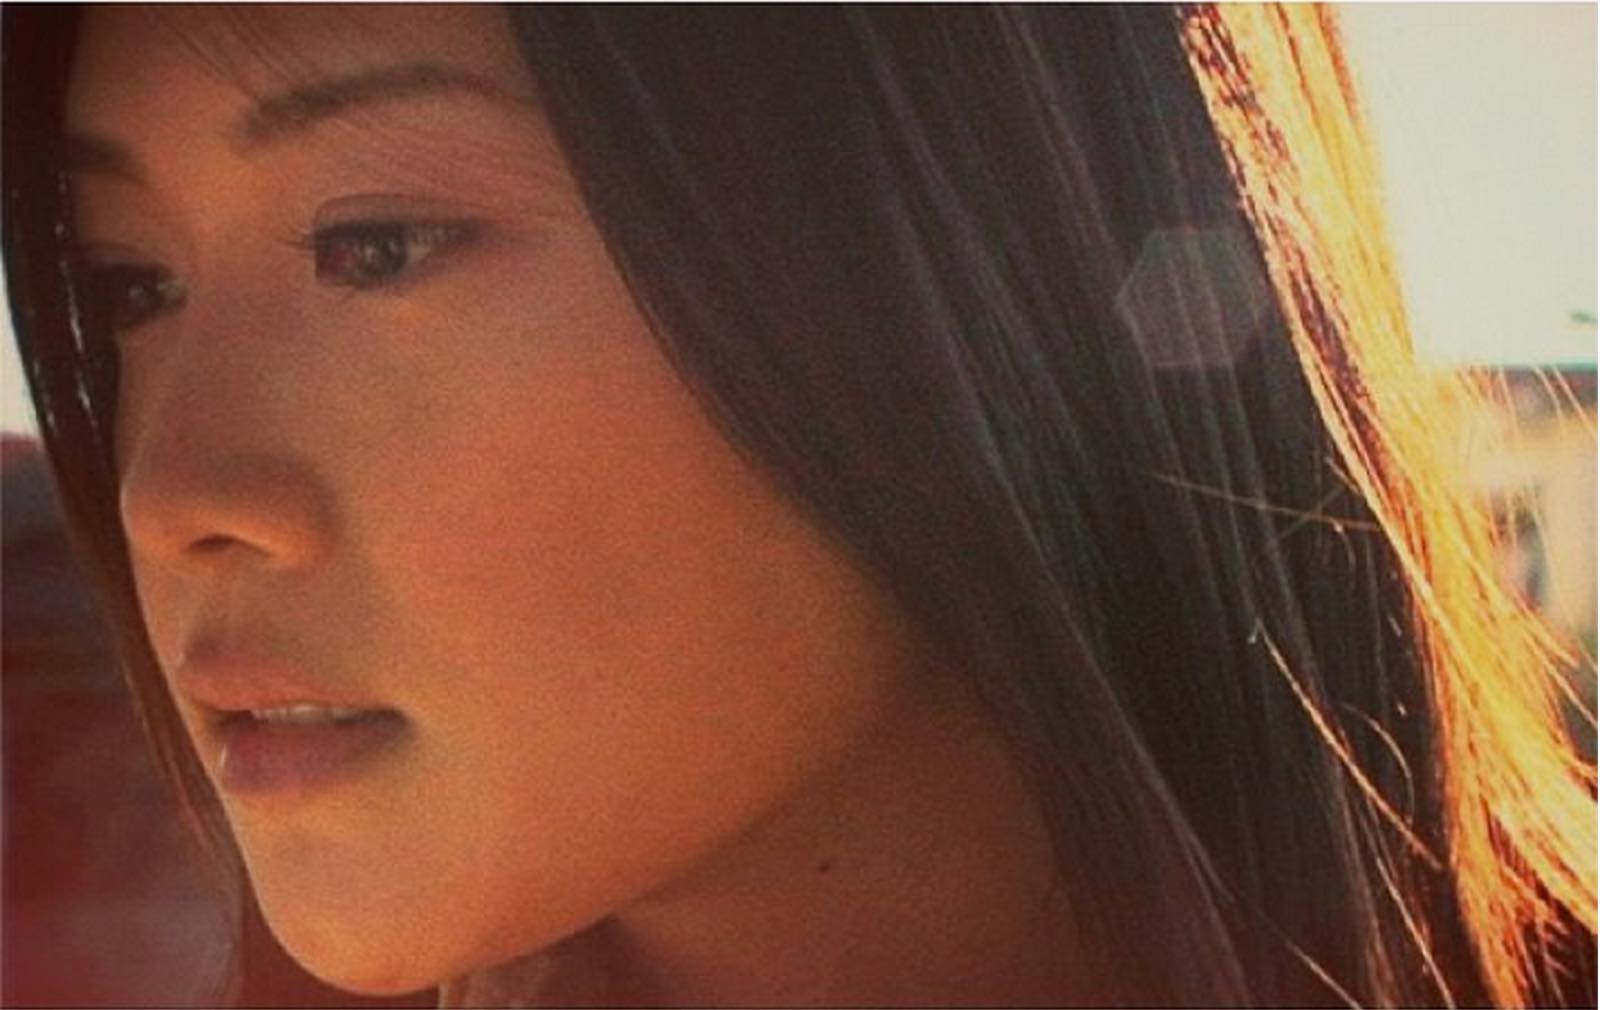 The Must-Have DVD/Blu-ray for Any YUI Fan! “FIND ME YUI Visual Best” Has all the MVs and More!